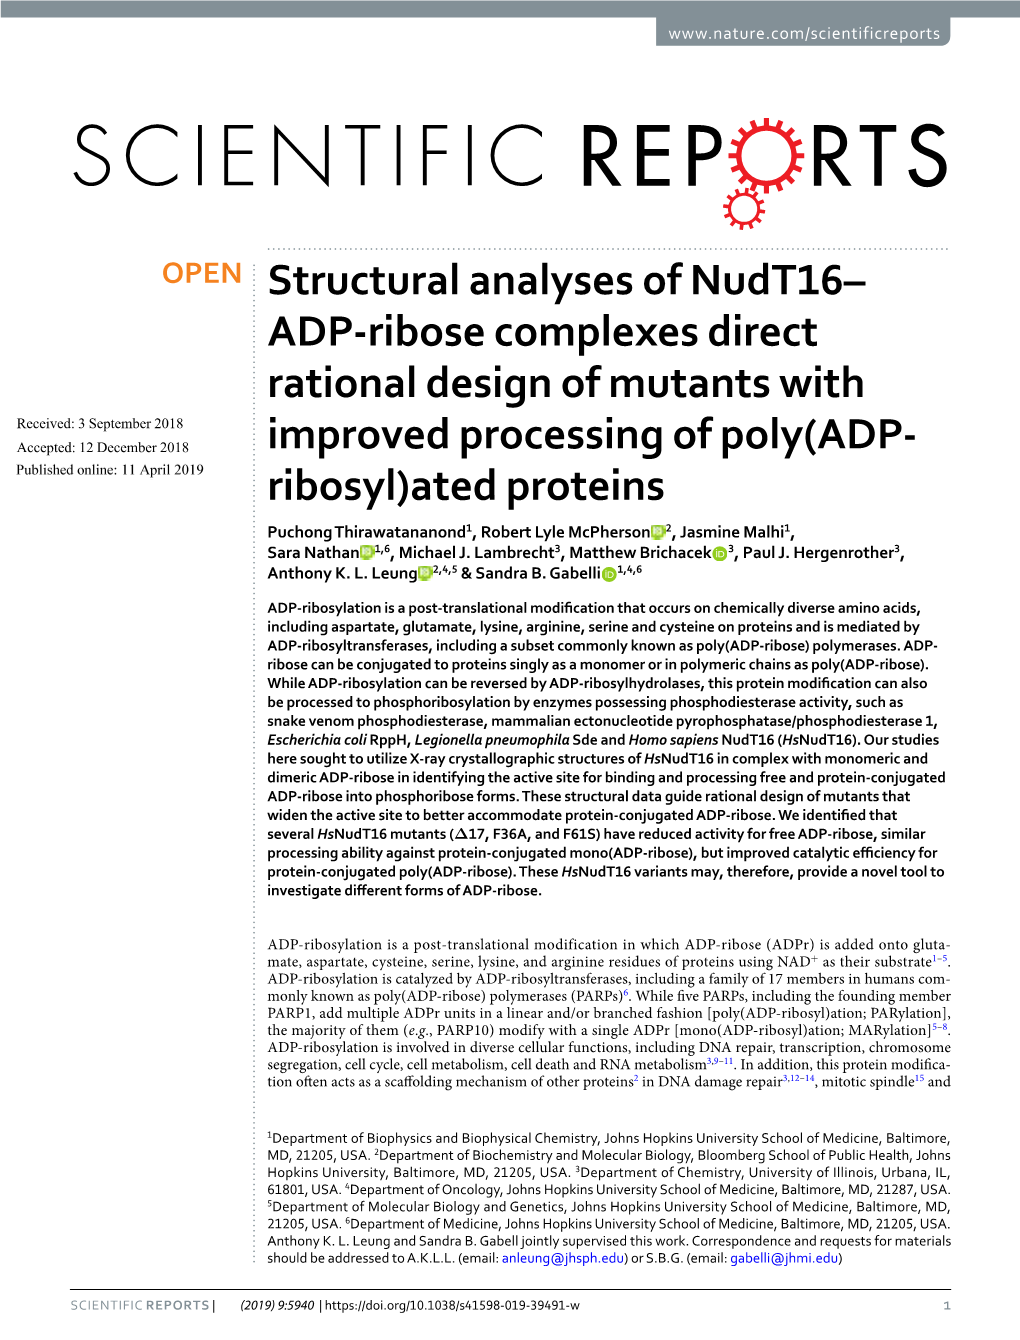 Structural Analyses of Nudt16–ADP-Ribose Complexes Direct